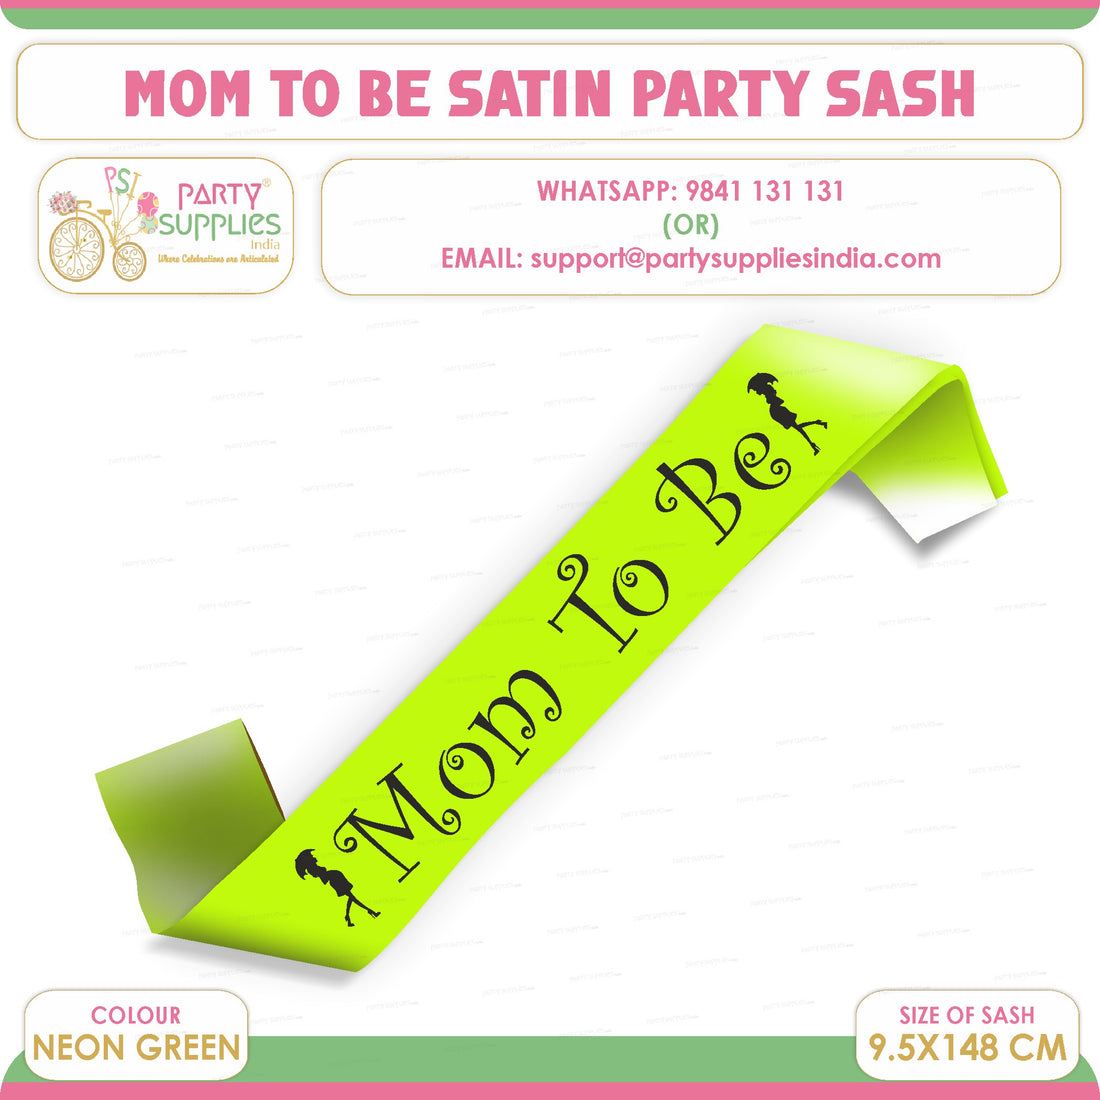 PSI Mom to Be Neon Green Satin Party Sash